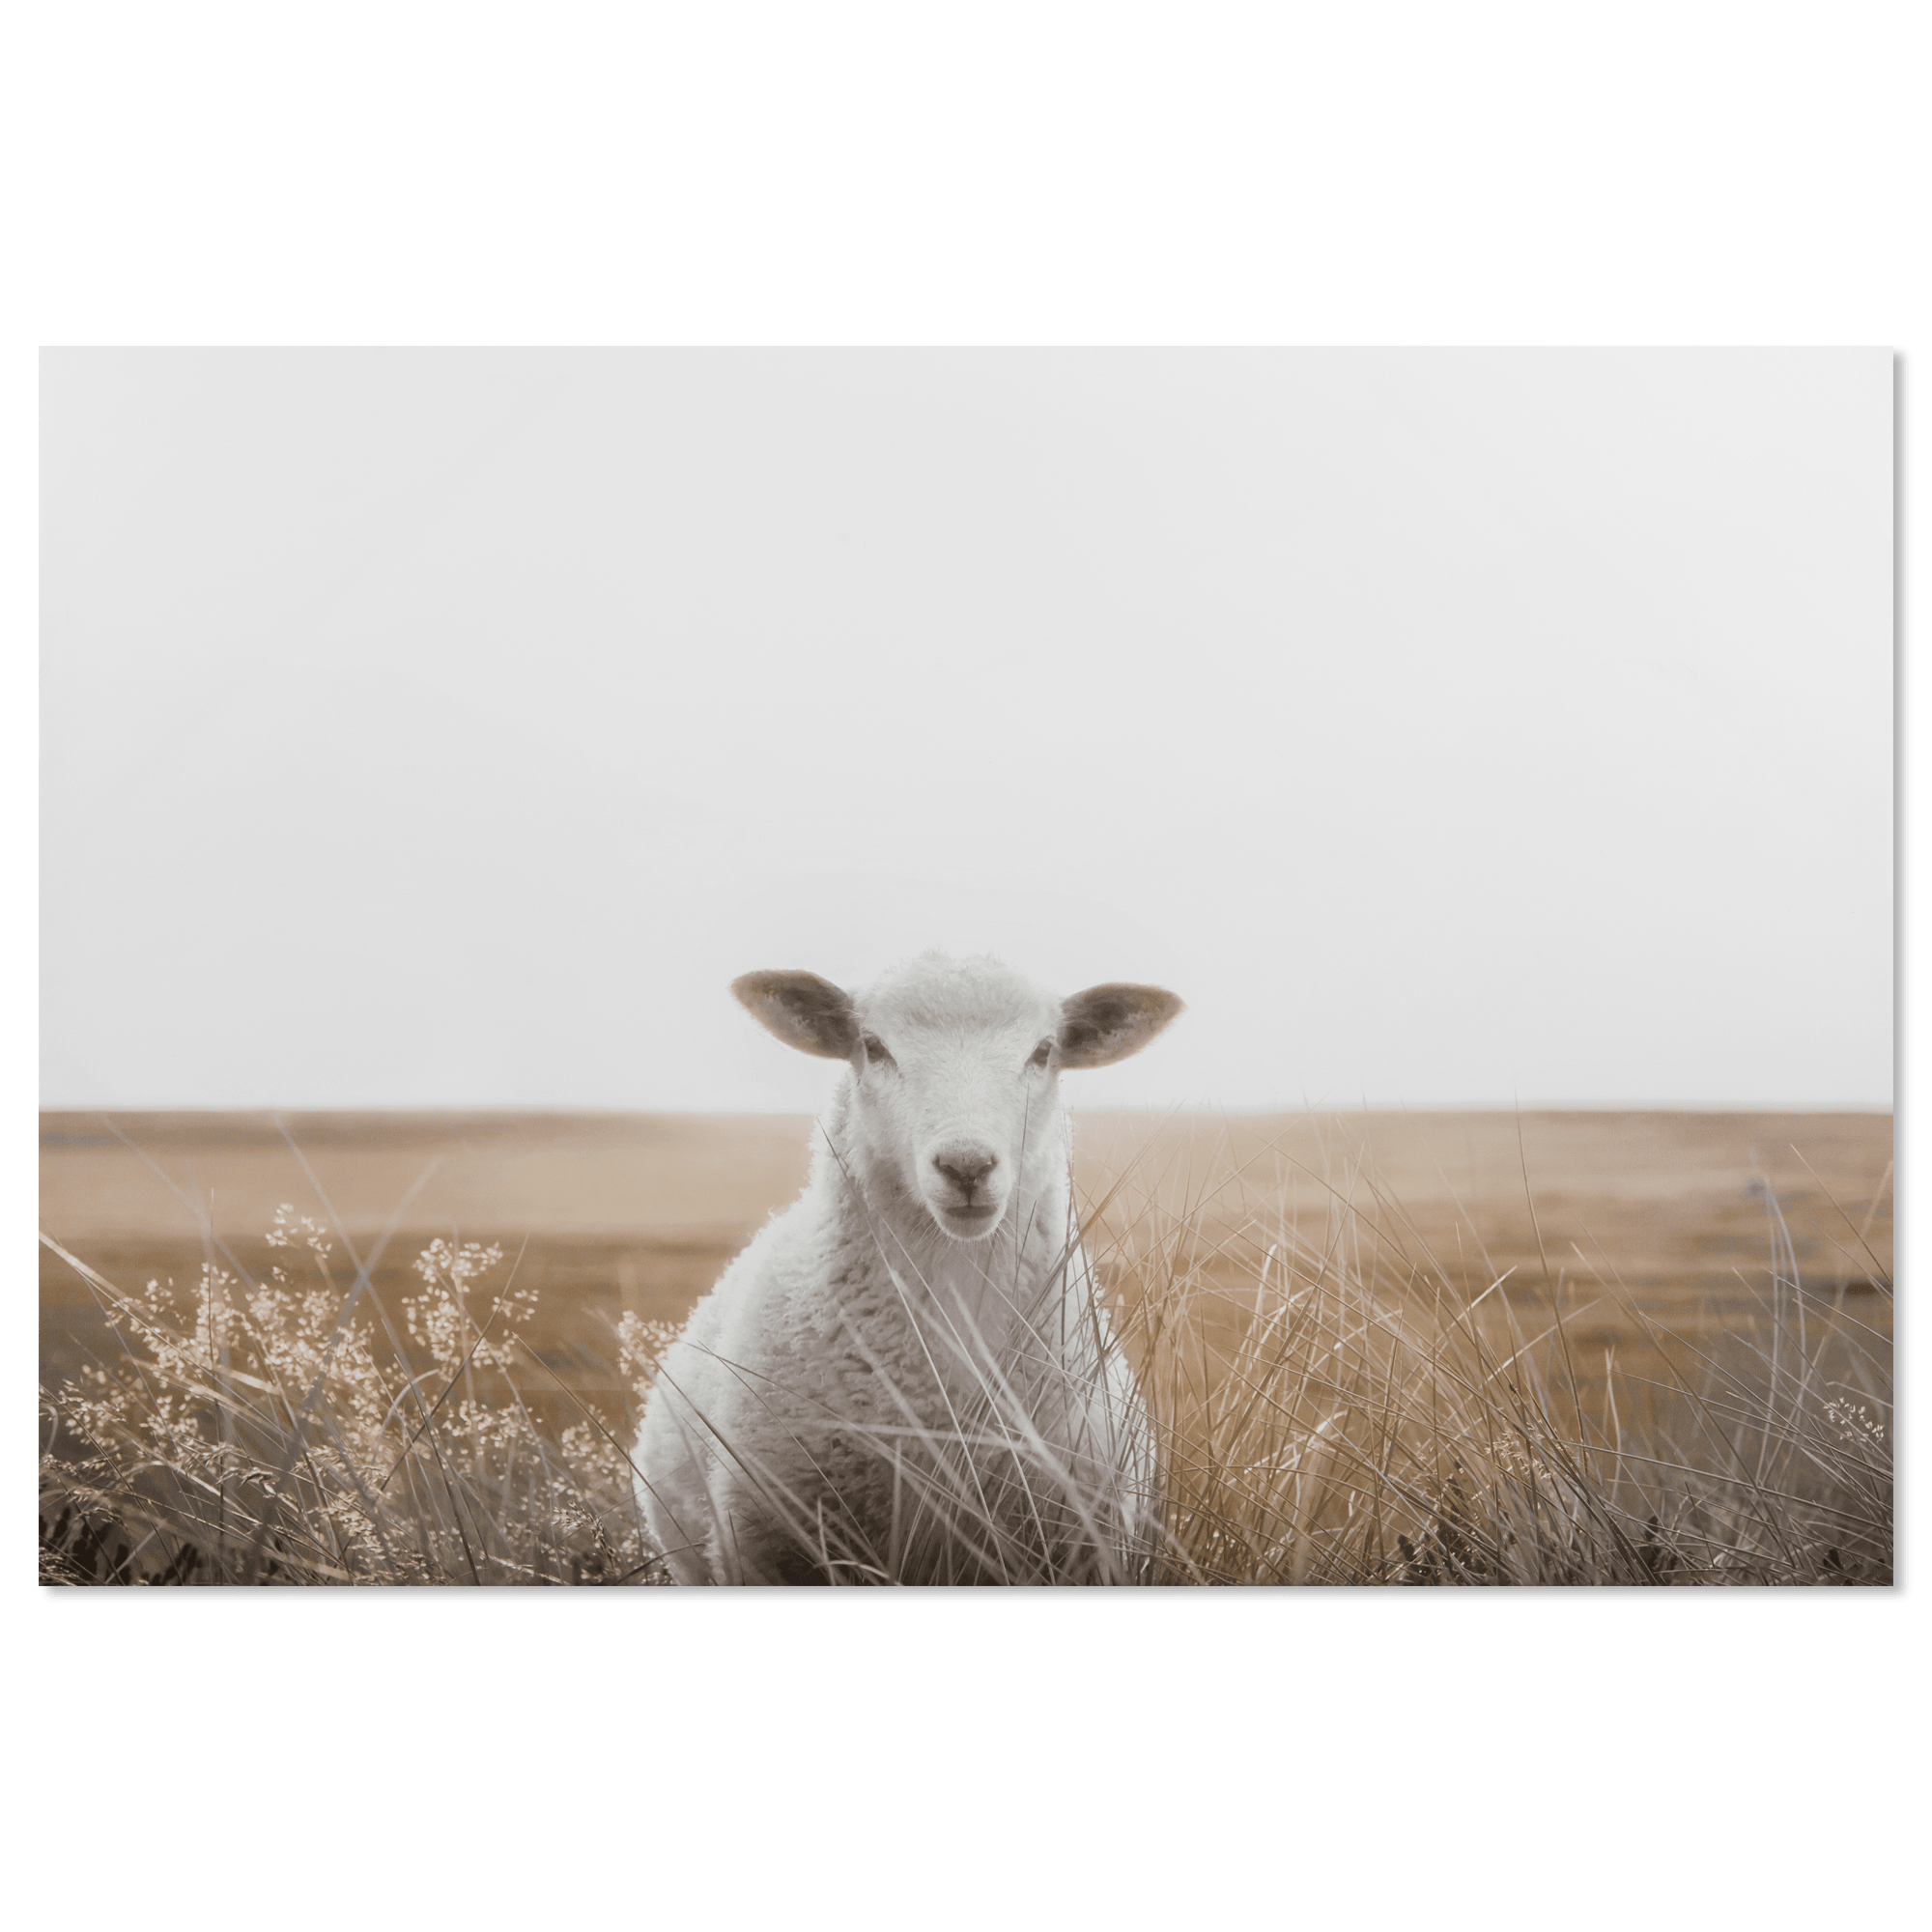 Lamb in Field Printed Canvas